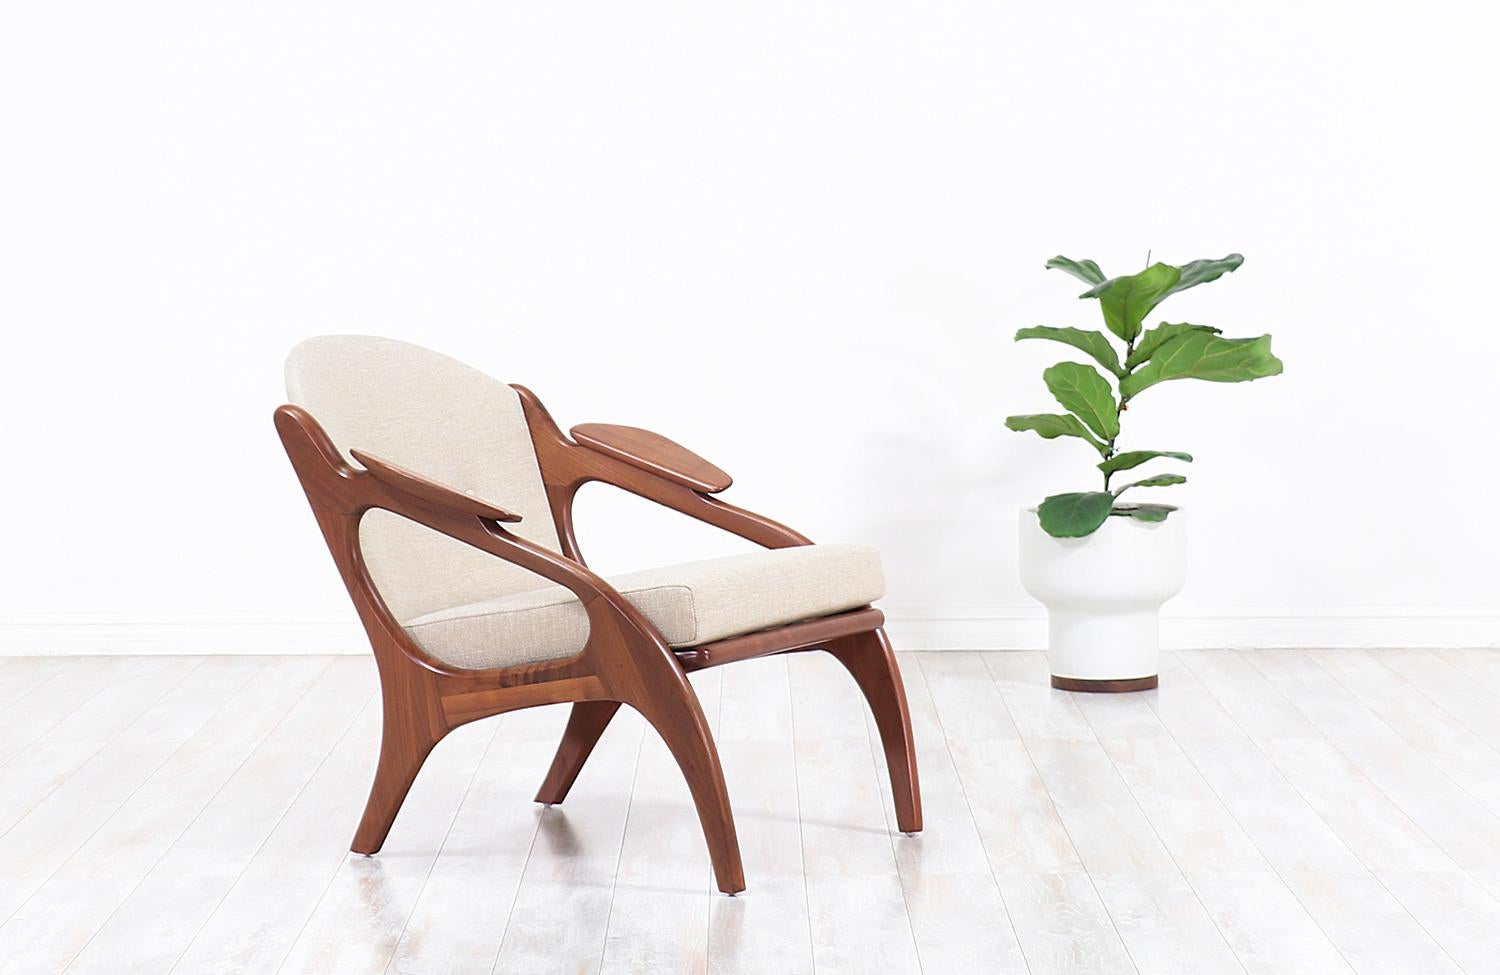 Stylish Mid-Century Modern lounge chair Model 2249-C designed by Adrian Pearsall for Craft Associates in the United States, circa 1960s. This elegant and ergonomic lounge chair features a solid walnut angled base and sculpted wood padded arms